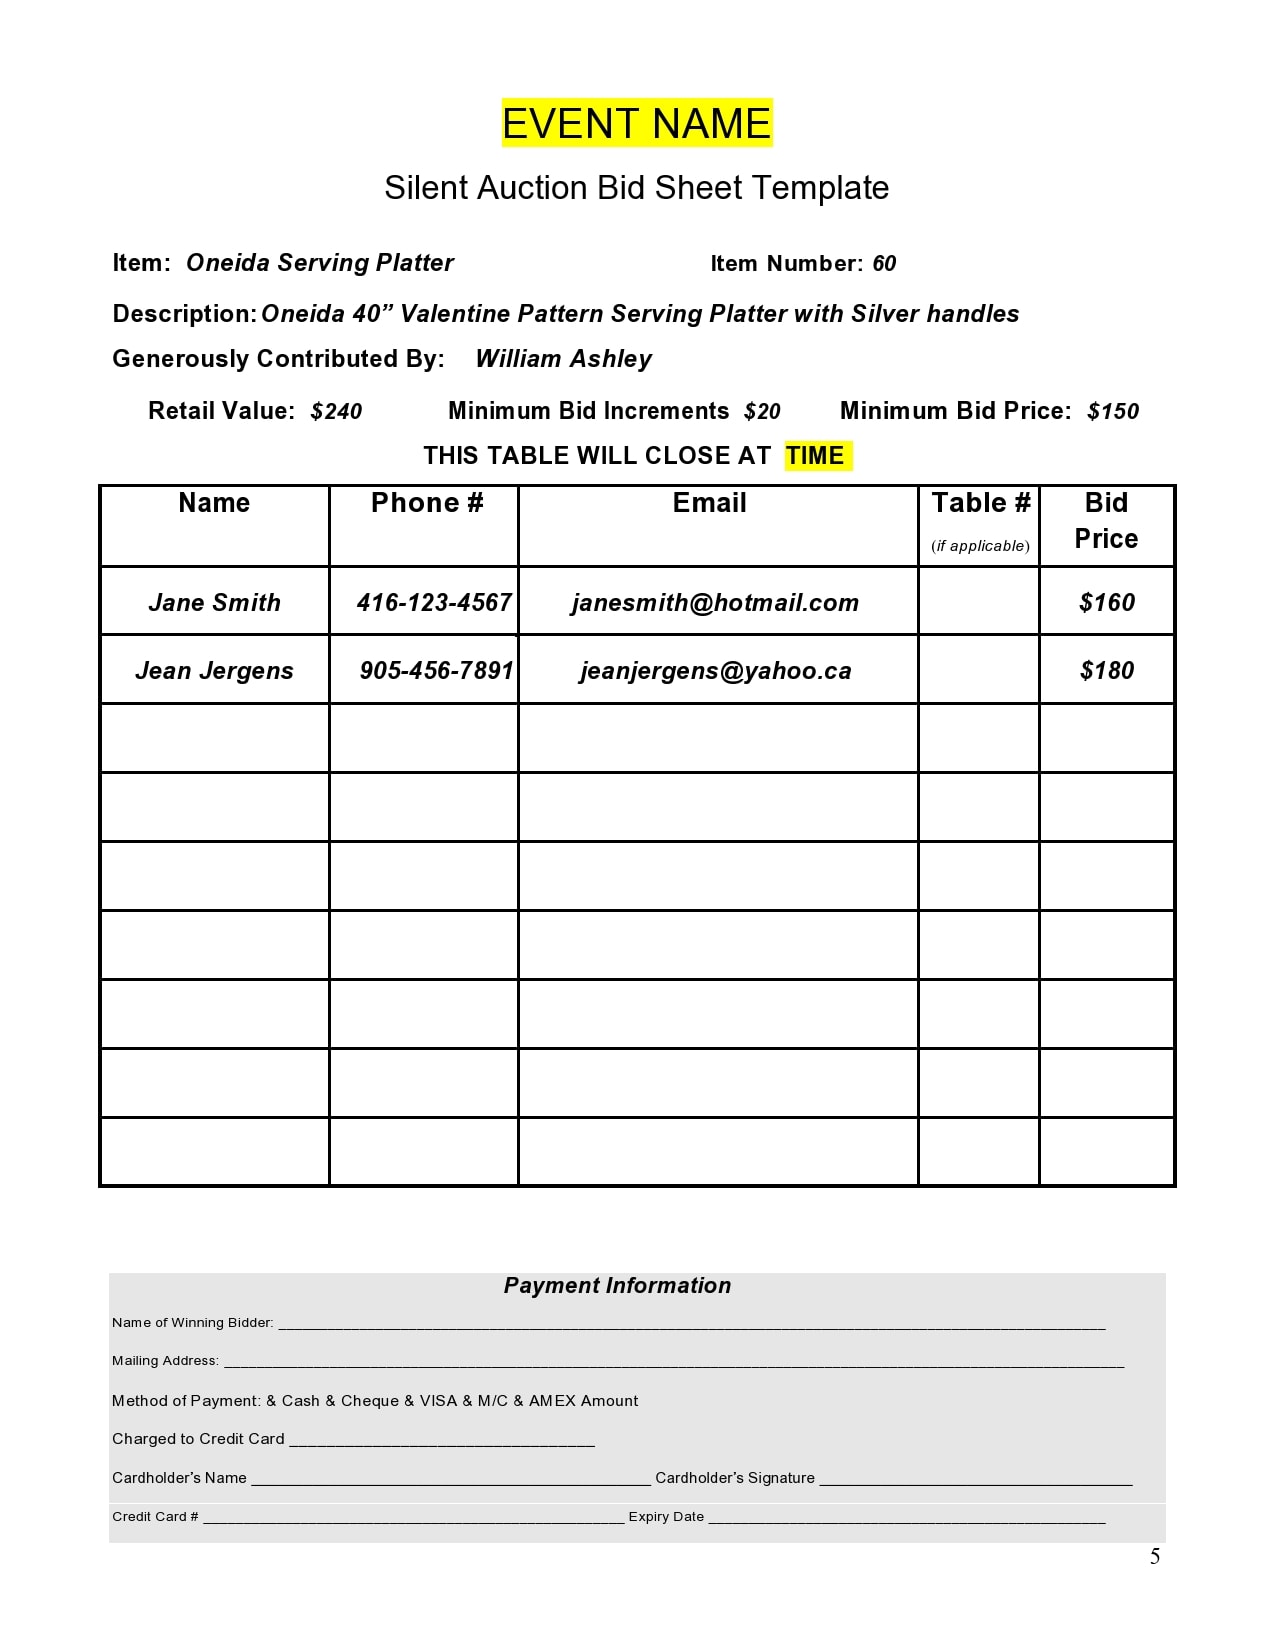 24 Silent Auction Bid Sheet Templates [Free] - TemplateArchive With Auction Bid Cards Template